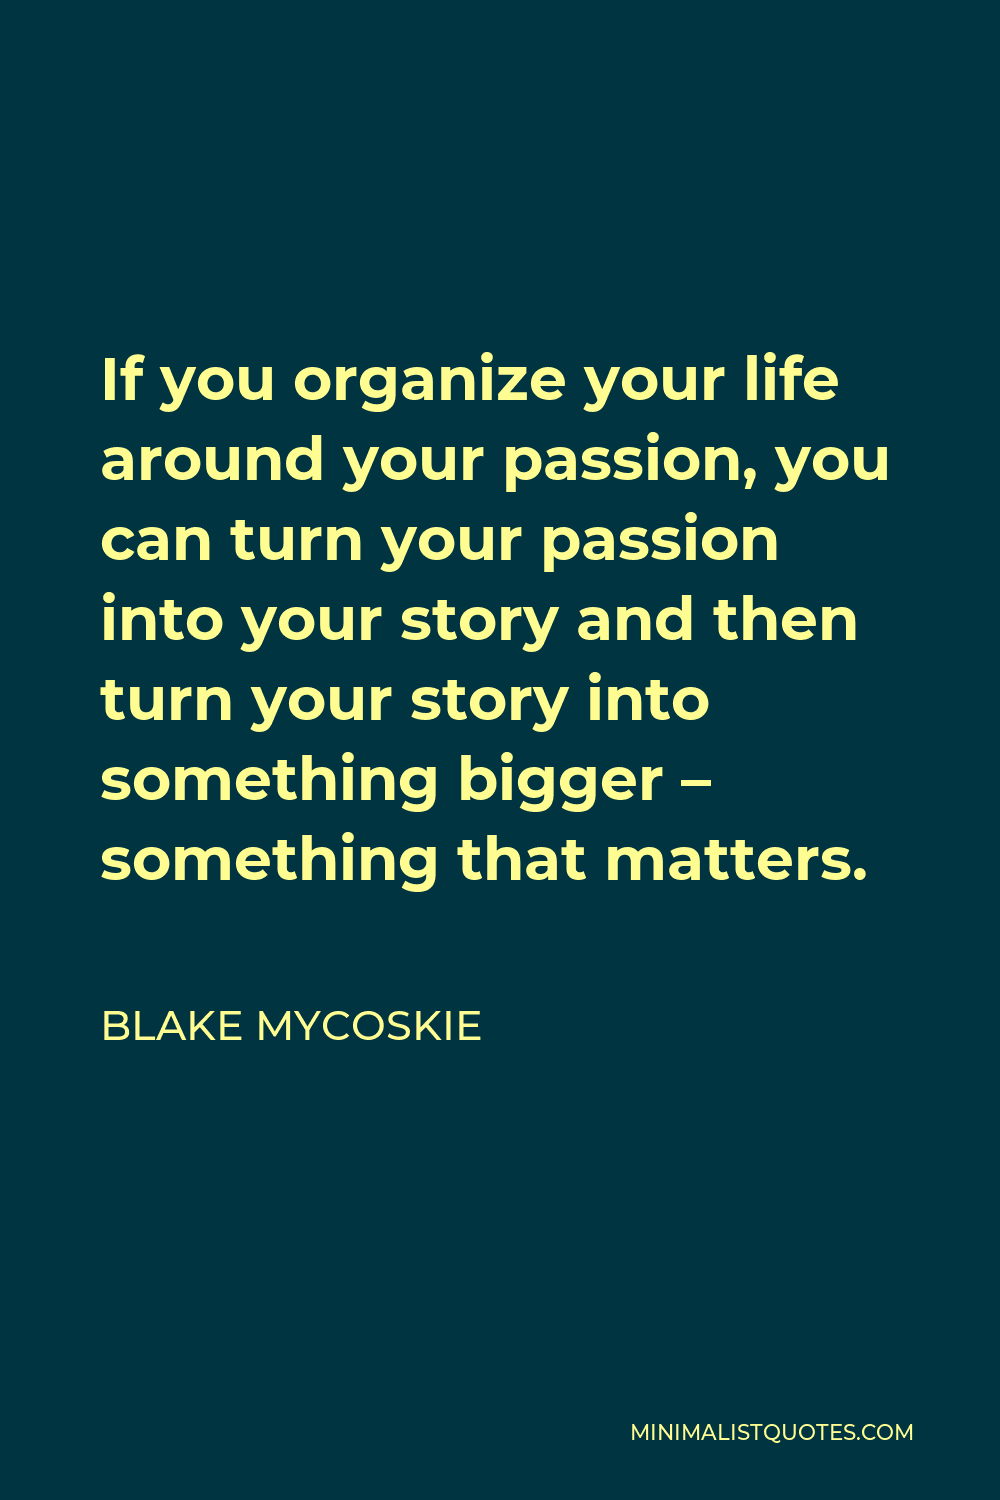 Blake Mycoskie Quote - If you organize your life around your passion, you can turn your passion into your story and then turn your story into something bigger – something that matters.